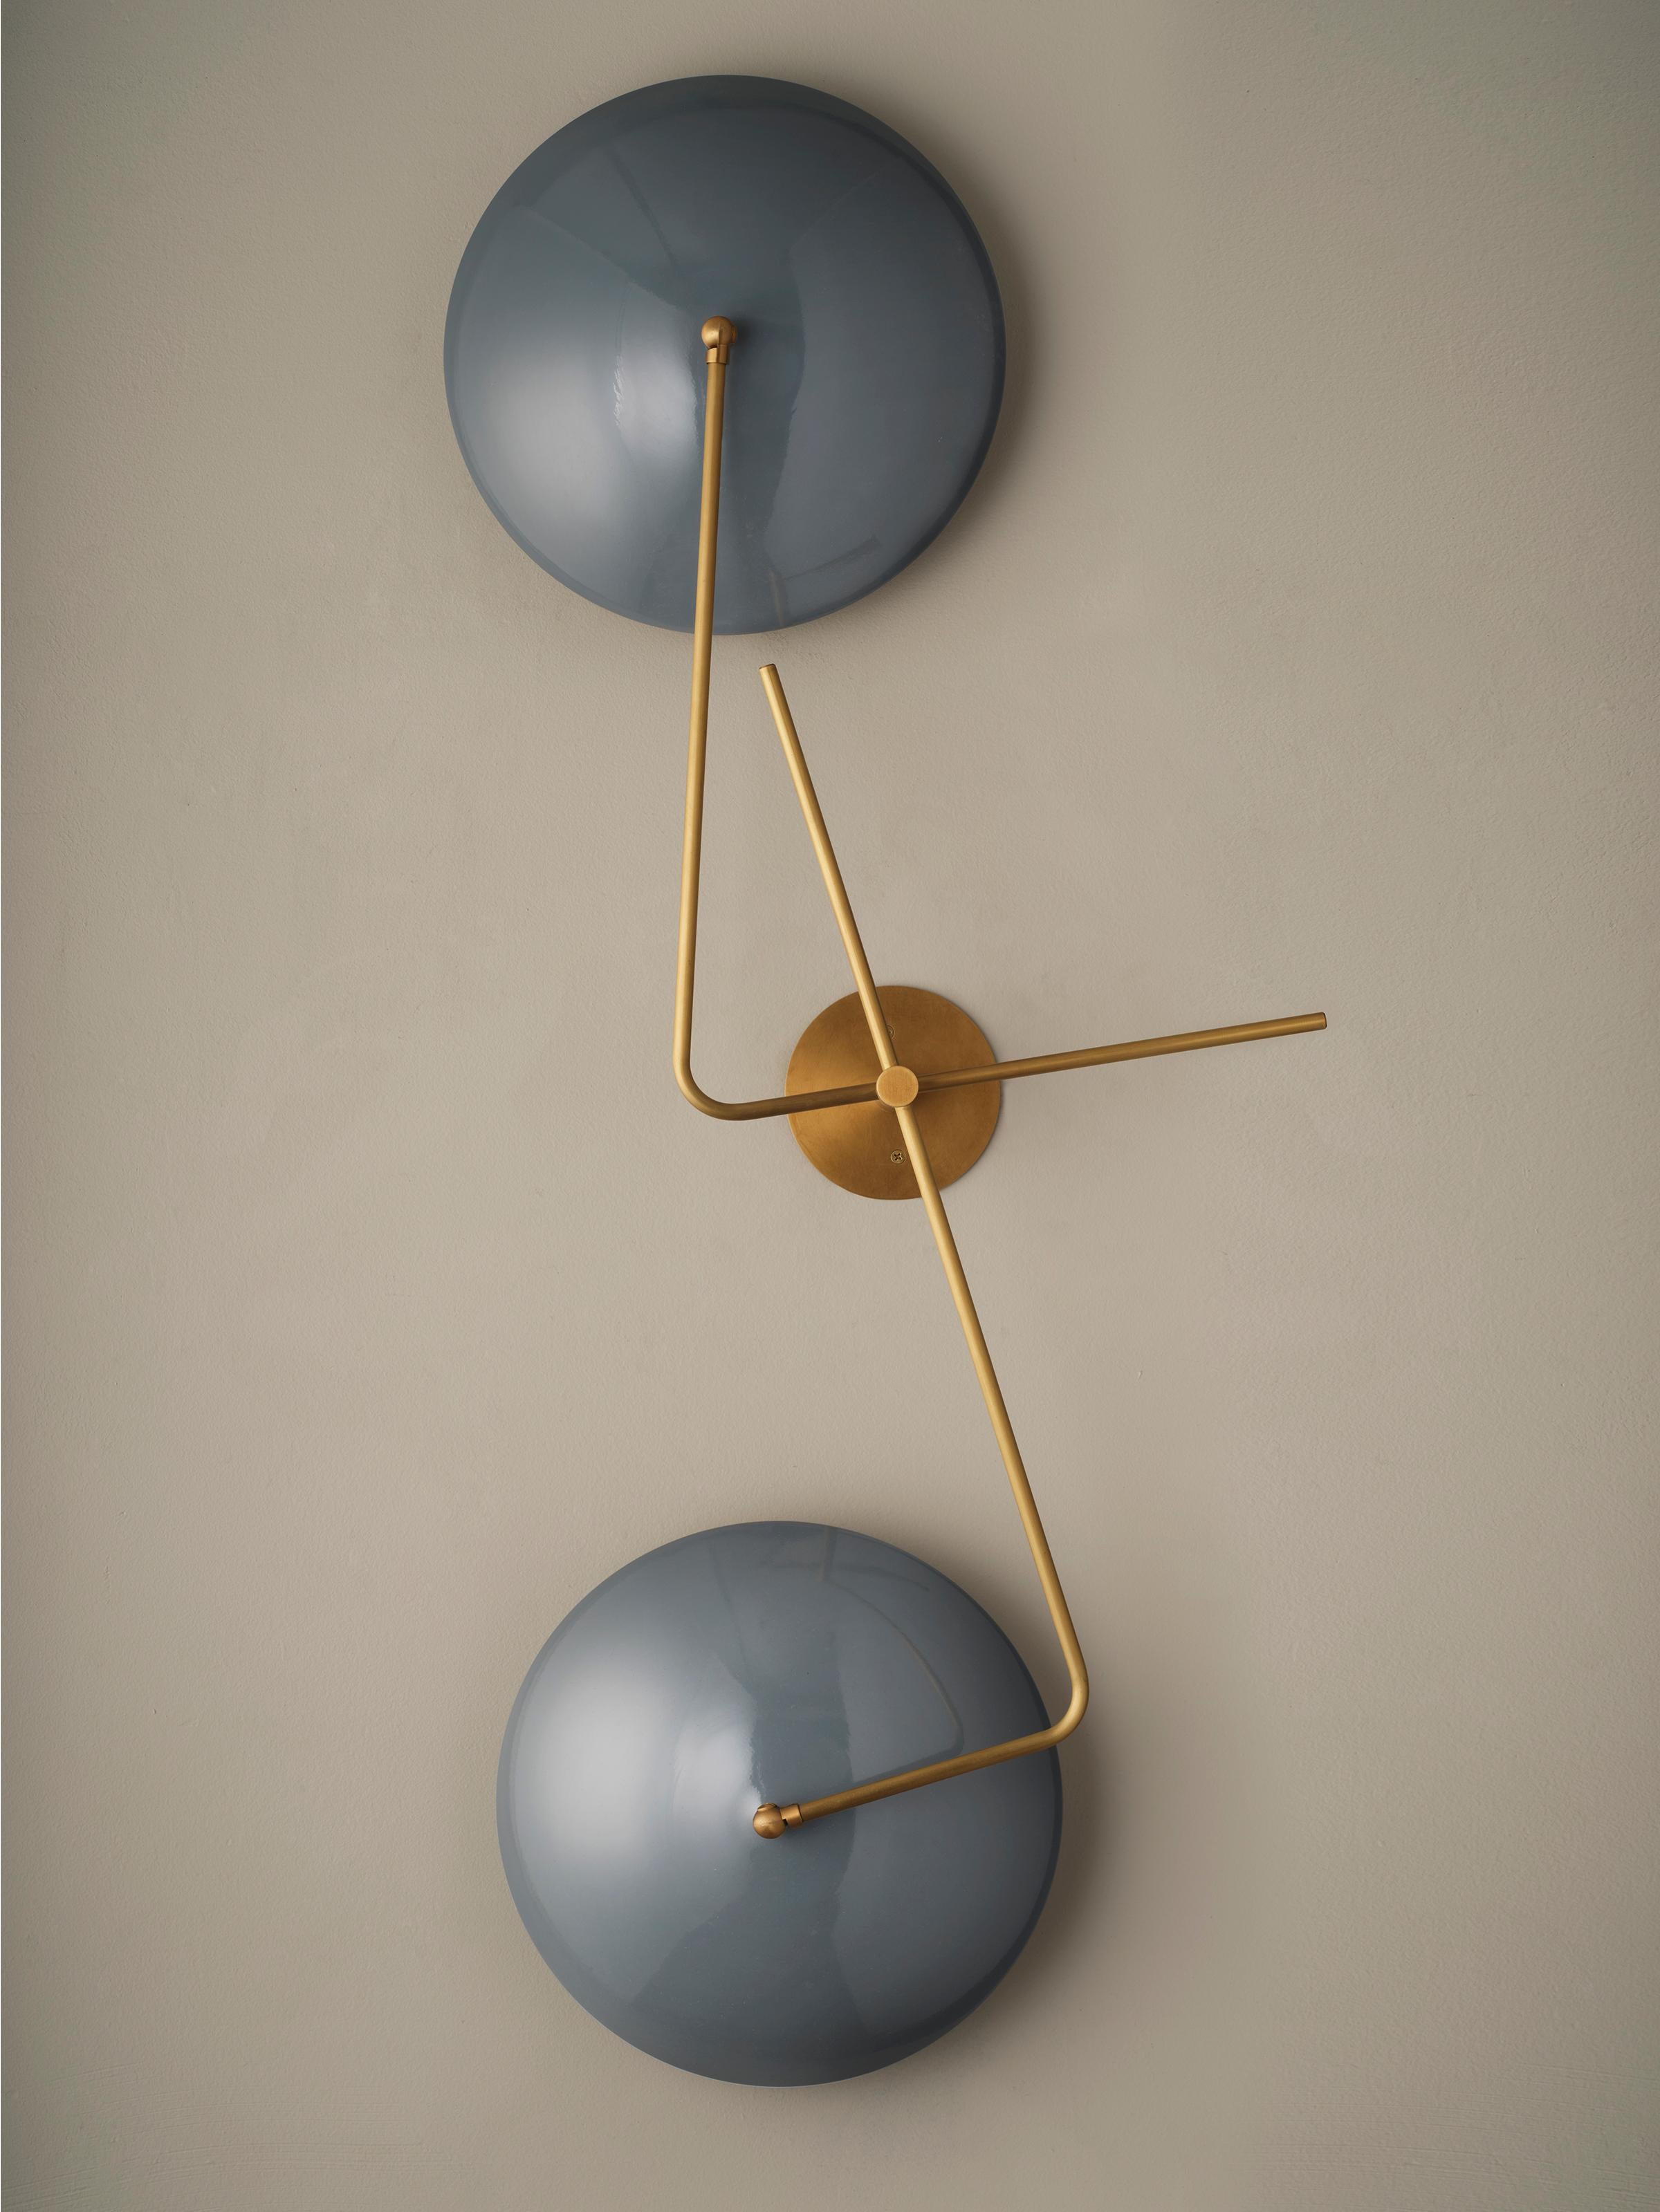 American Pianeta Large-Scale Wall Light or Sconce in Enamel & Brass, Blueprint Lighting For Sale